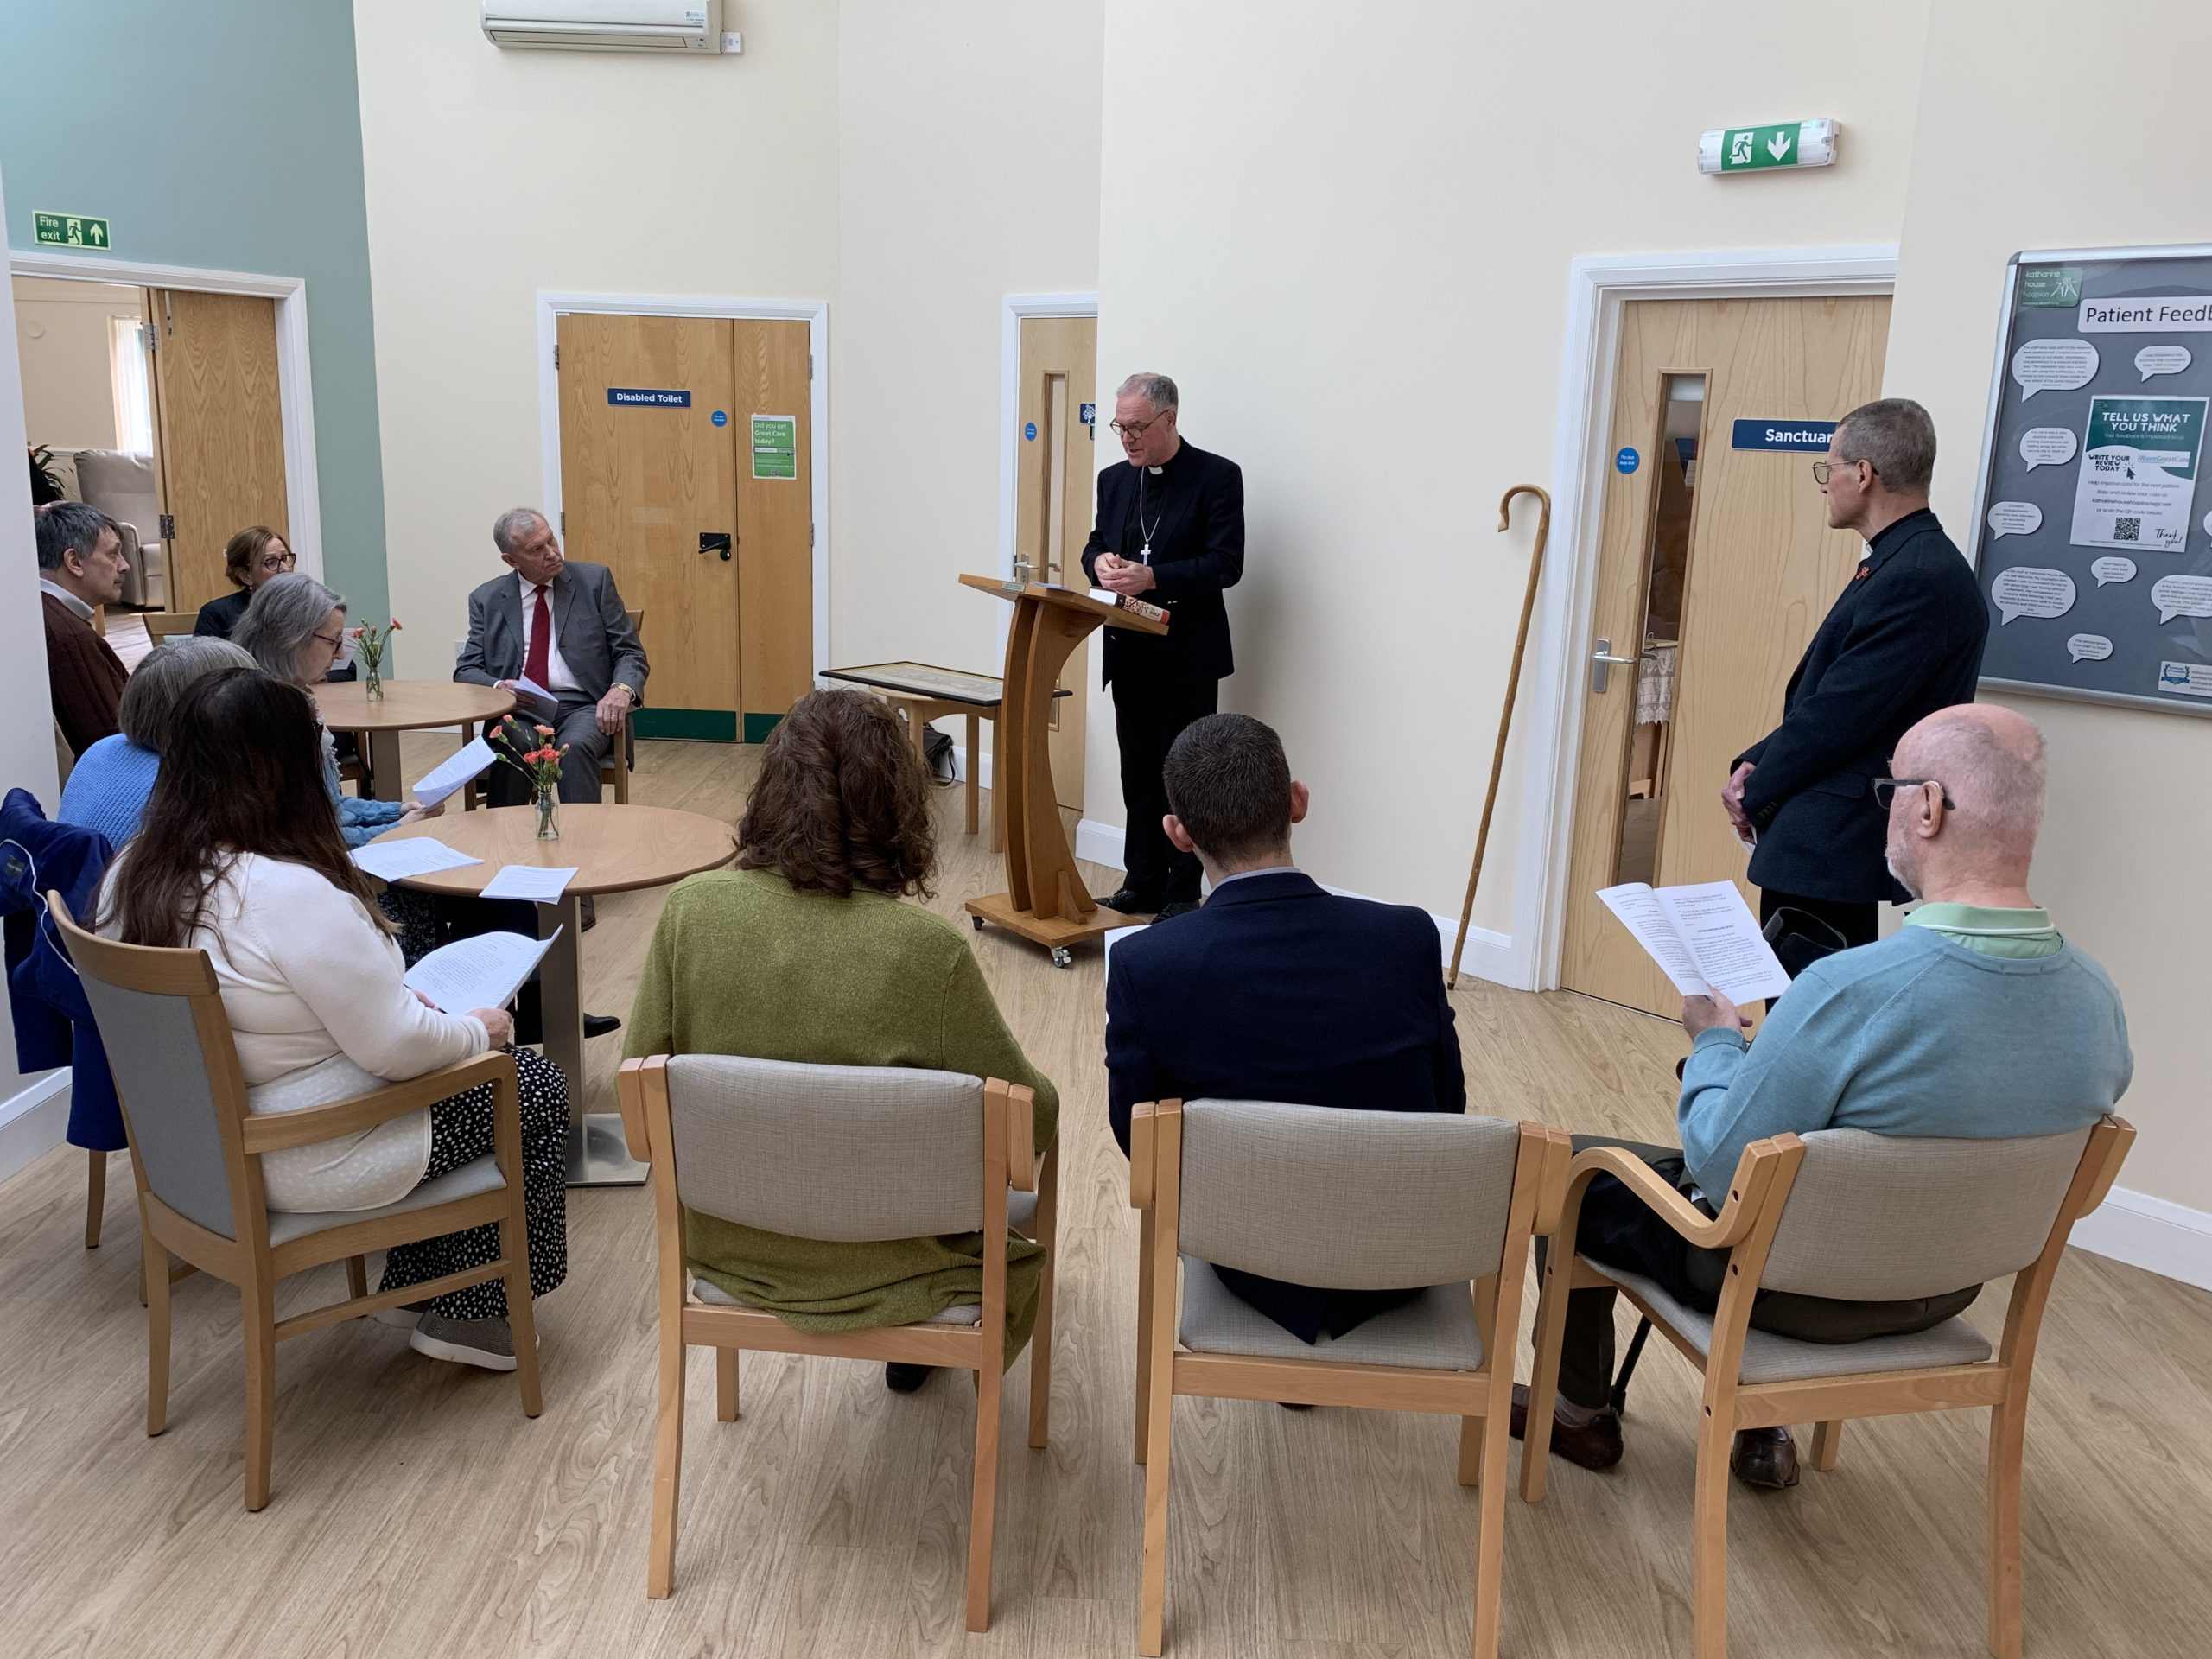 The Bishop of Stafford leads the service in our Therapy & Wellbeing Centre